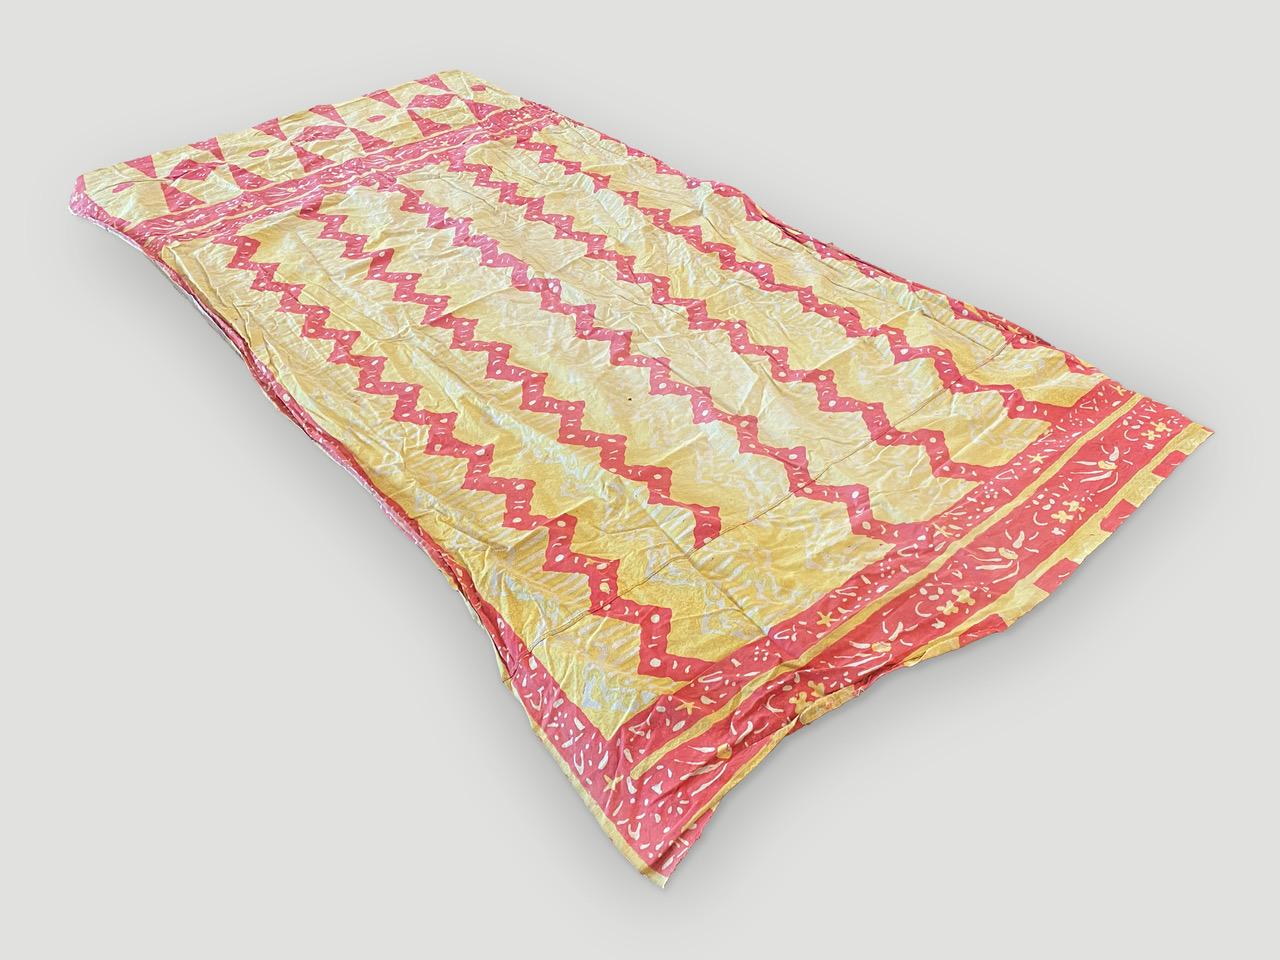 Beautiful antique ceremonial sarong from Bali. There are so many uses for these soft cotton batiks. Batik is an Indonesian technique of wax-resist dyeing applied to the entire textile. We have a collection. The price reflects one. All worn, soft